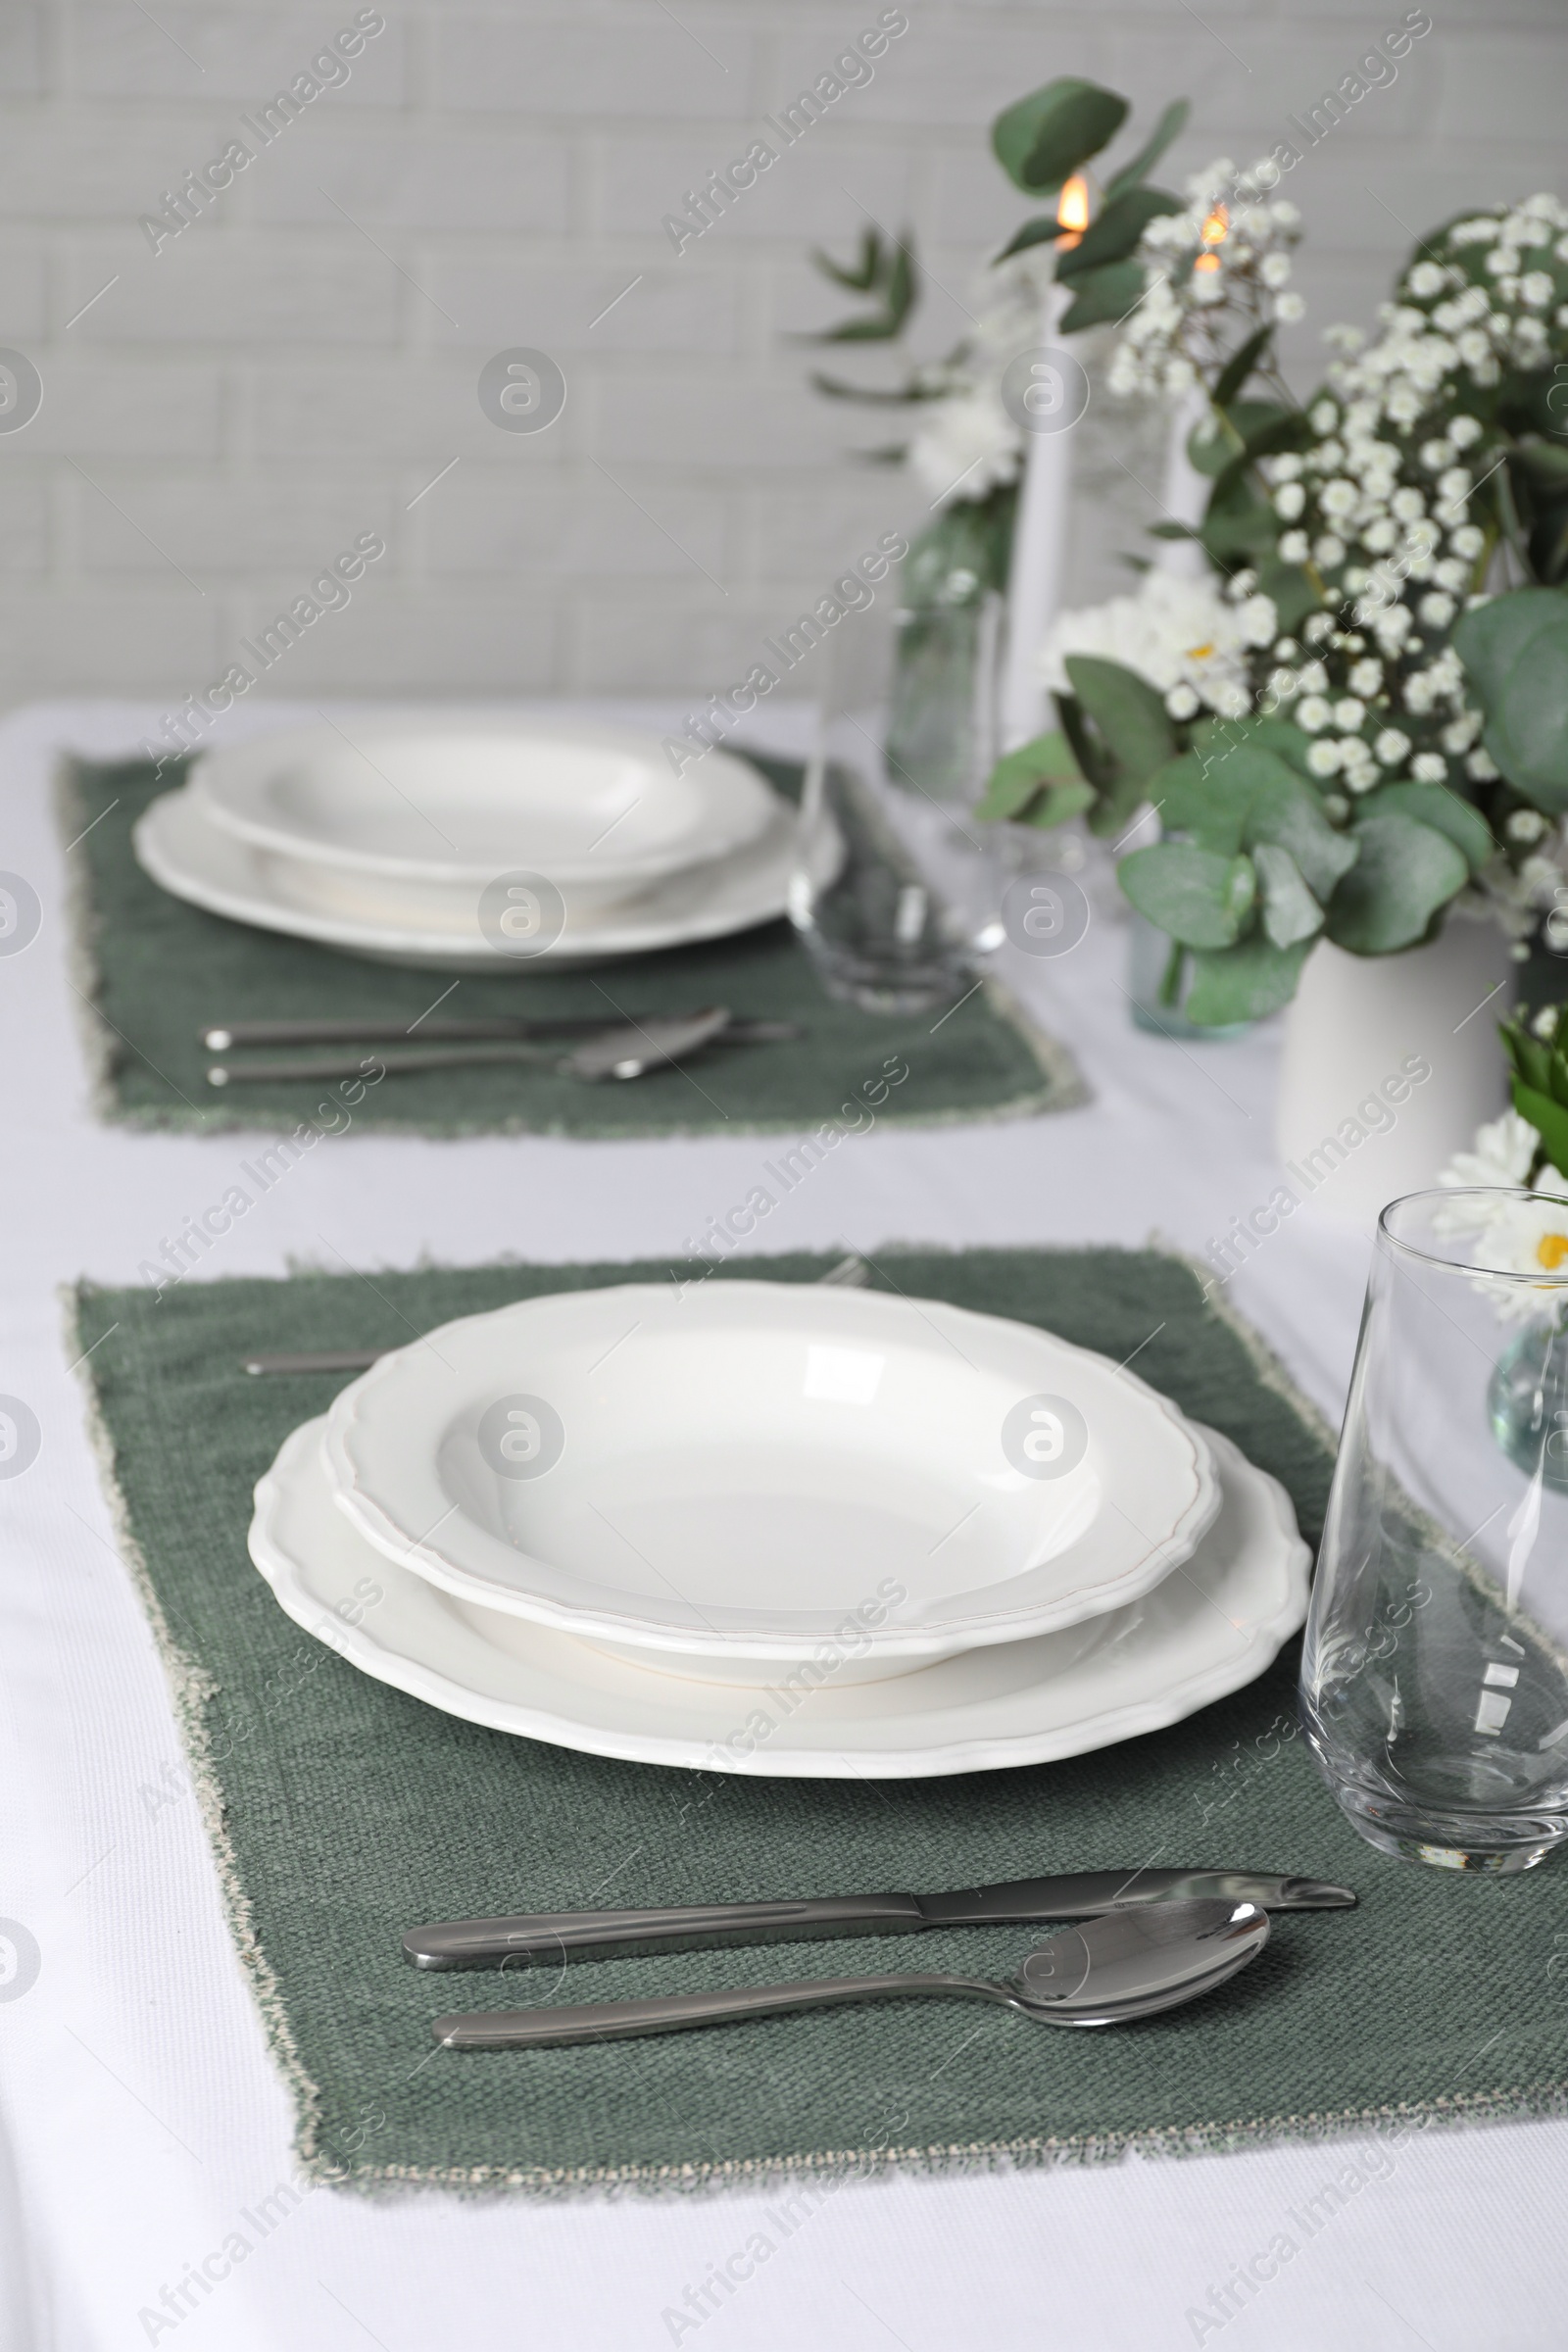 Photo of Elegant festive setting with floral decor on table